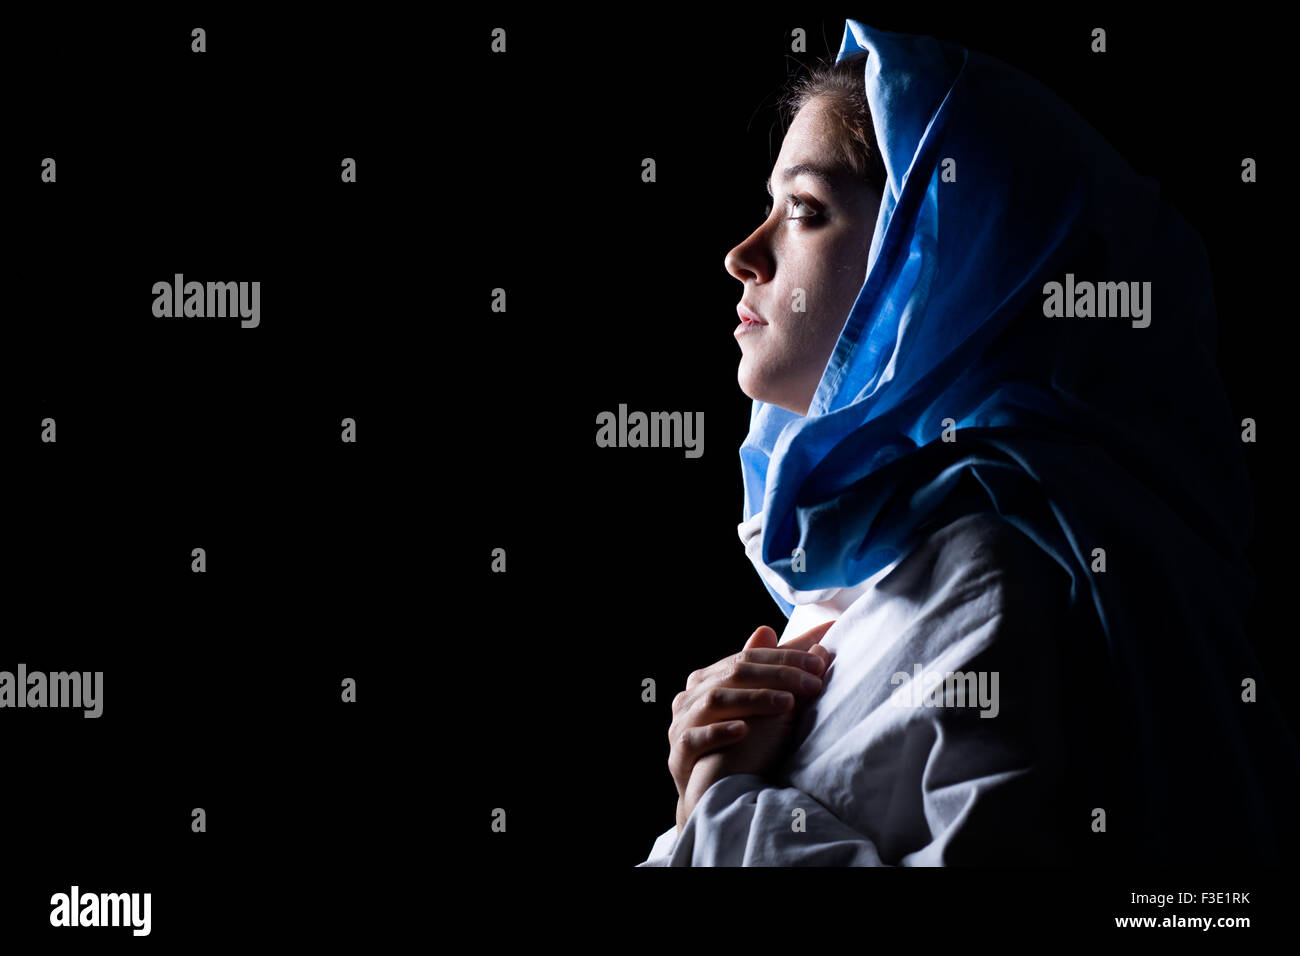 Virgin Mary with Blue Veil Praying on Black Background Stock Photo